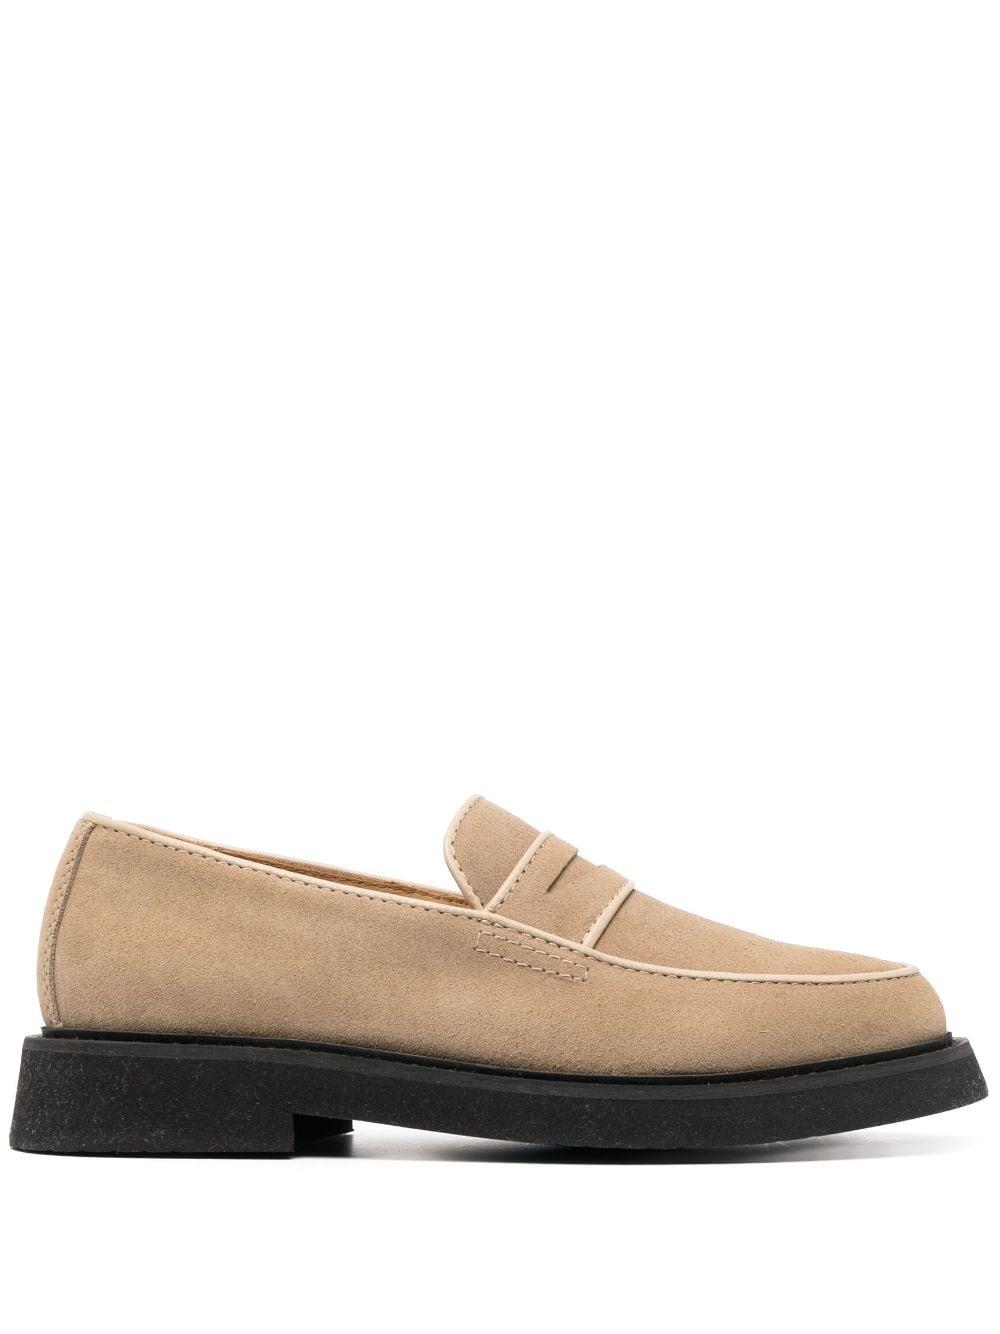 A.P.C. Gael Suede Loafers in Natural for Men | Lyst